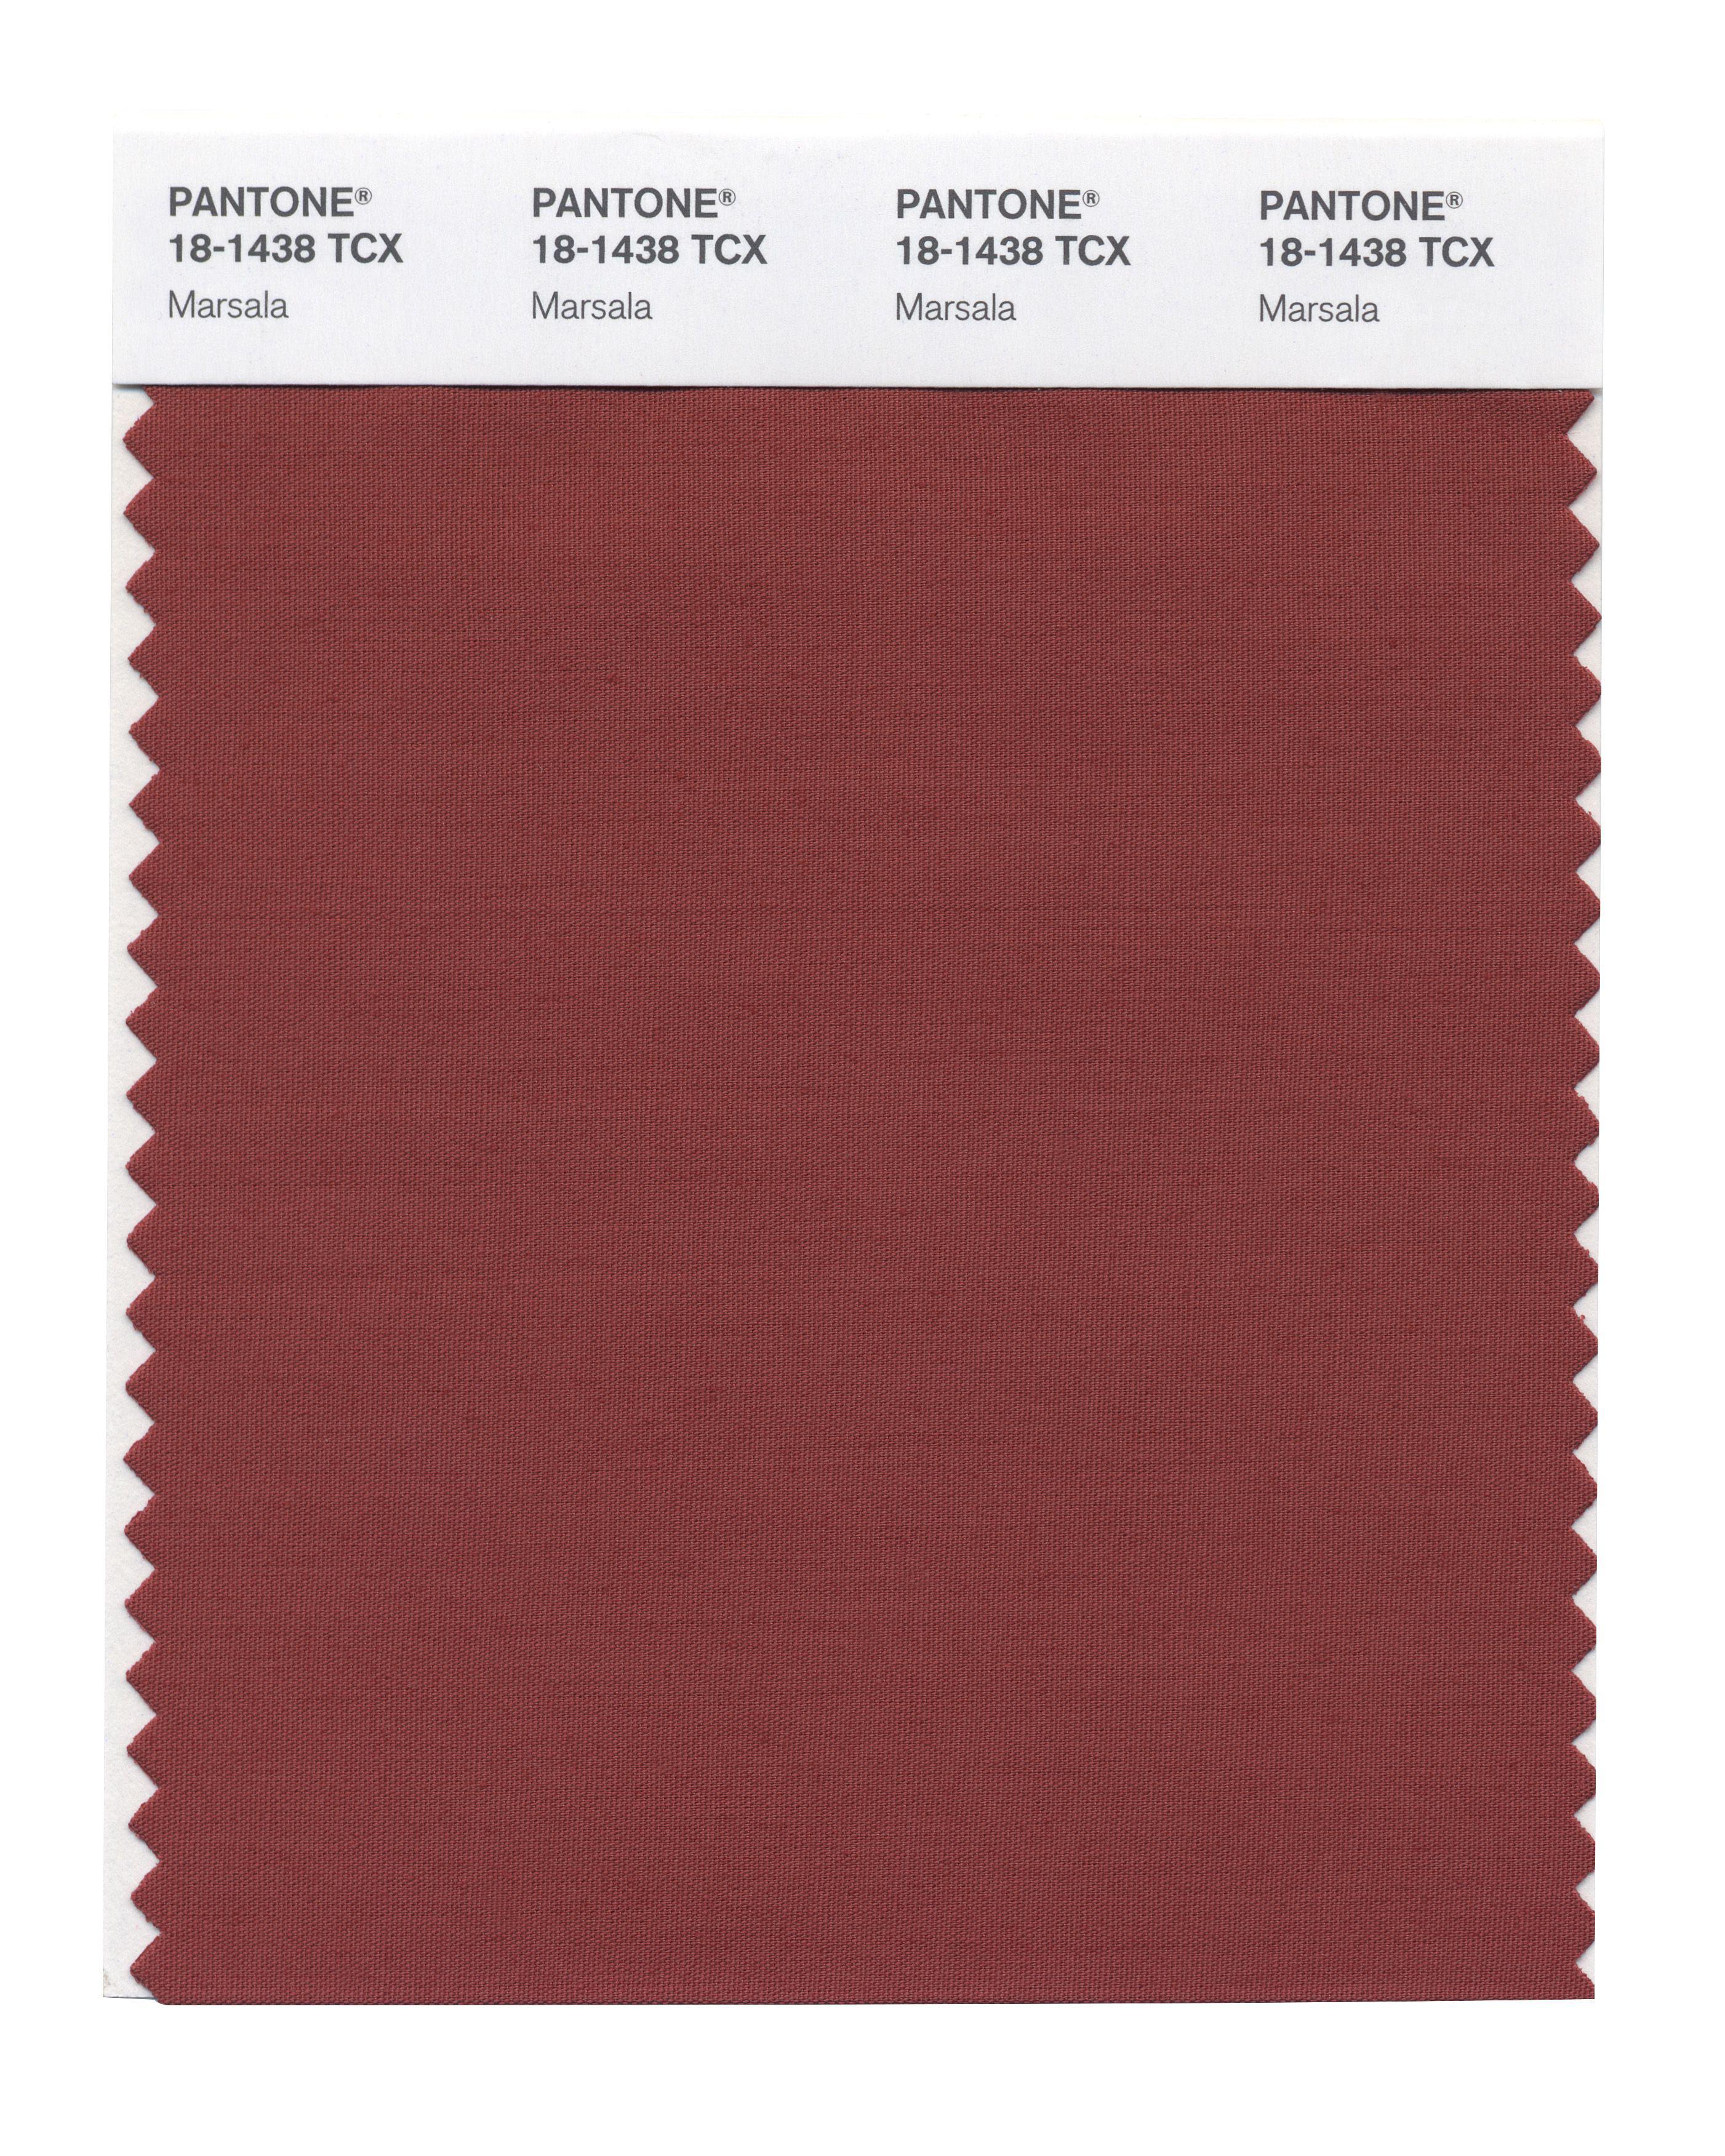 Marsala, Pantone Color of the Year